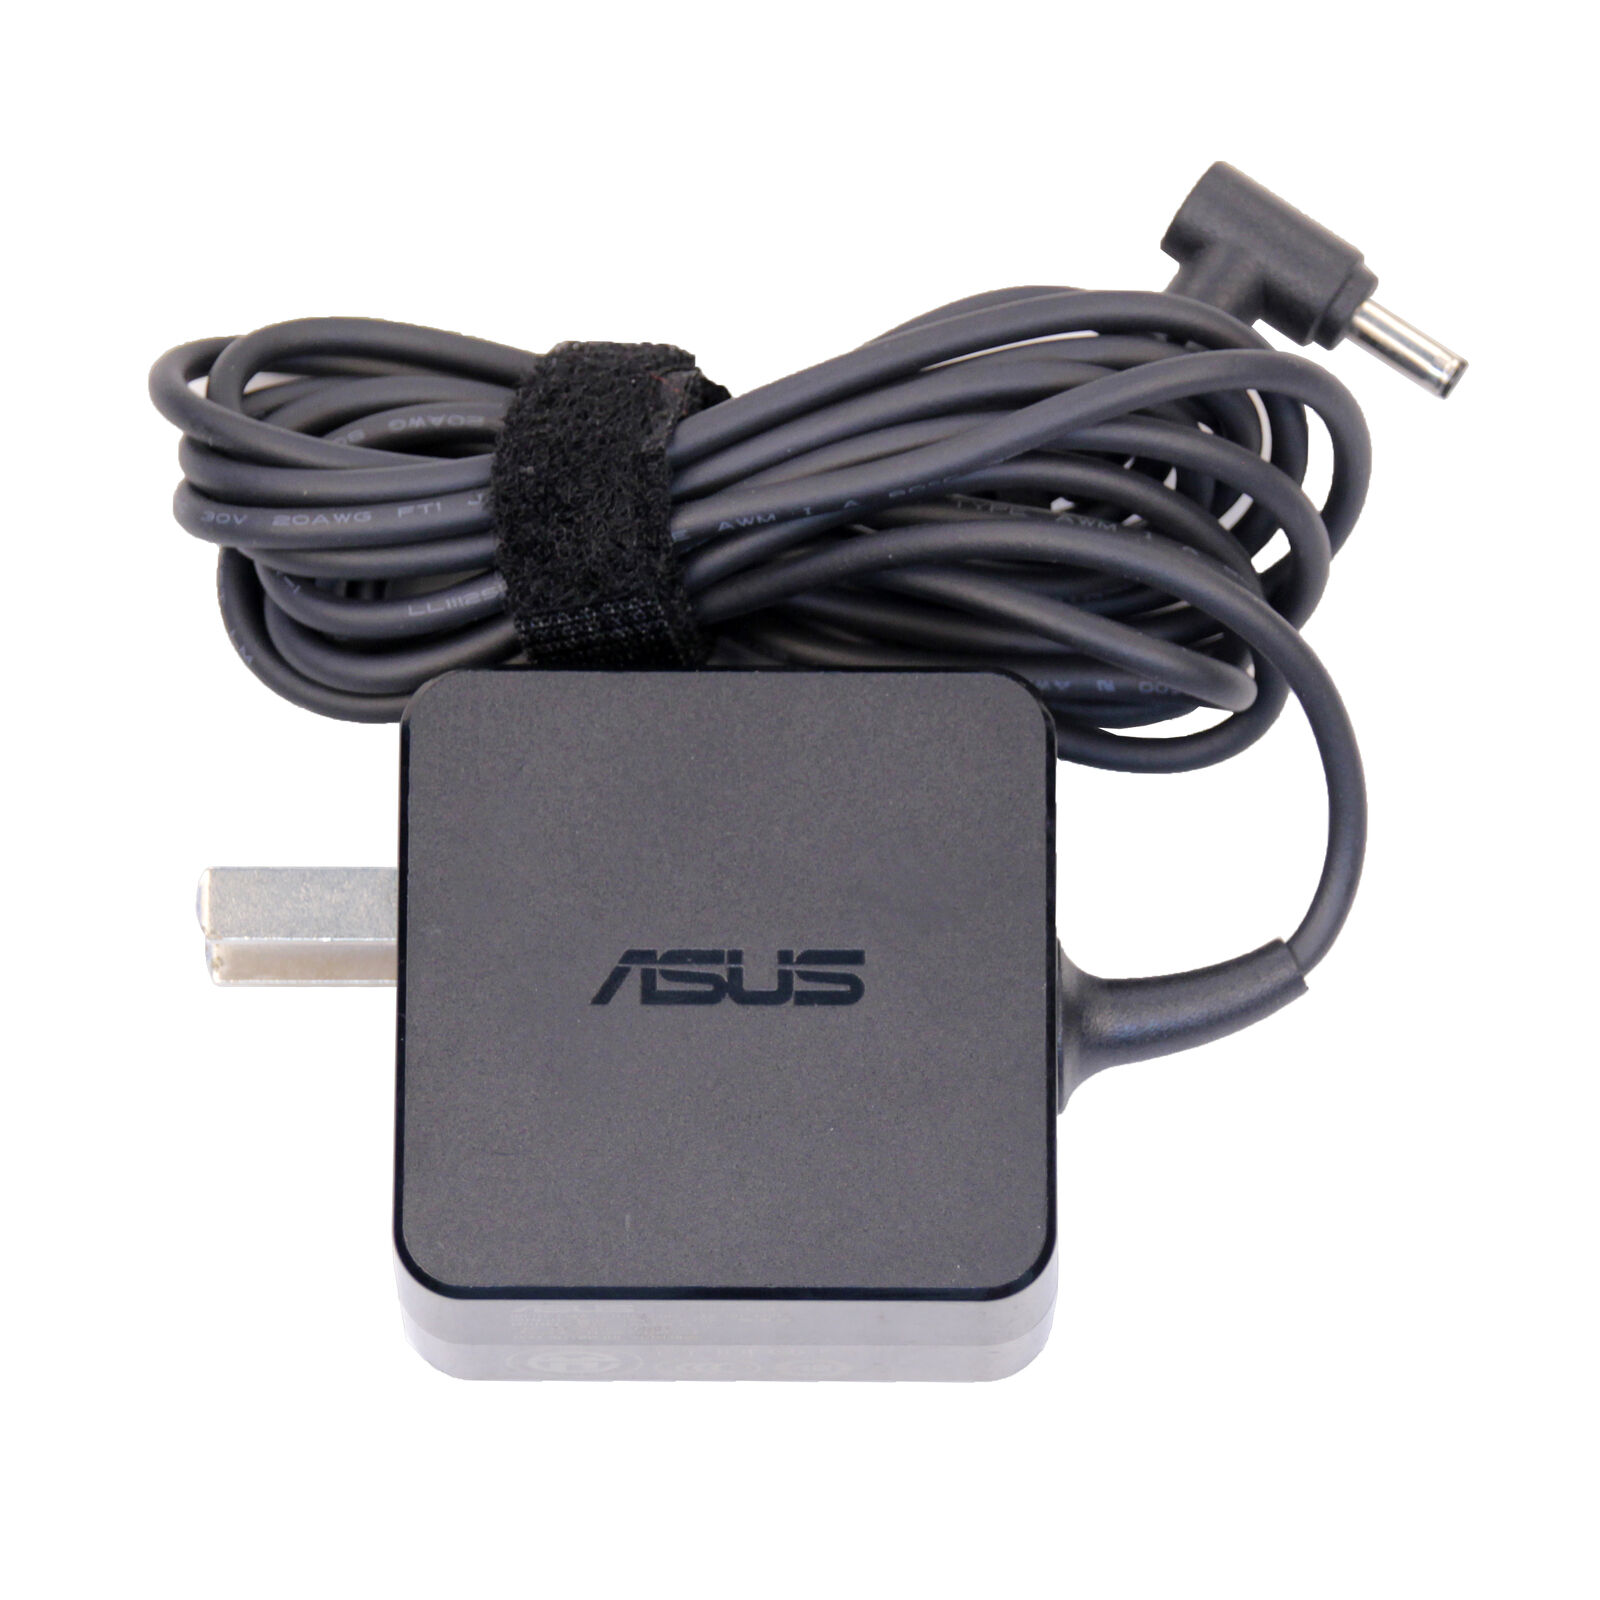 ASUS W19-045N3B 19V 2.37A 45W Genuine Original AC Power Adapter Charger